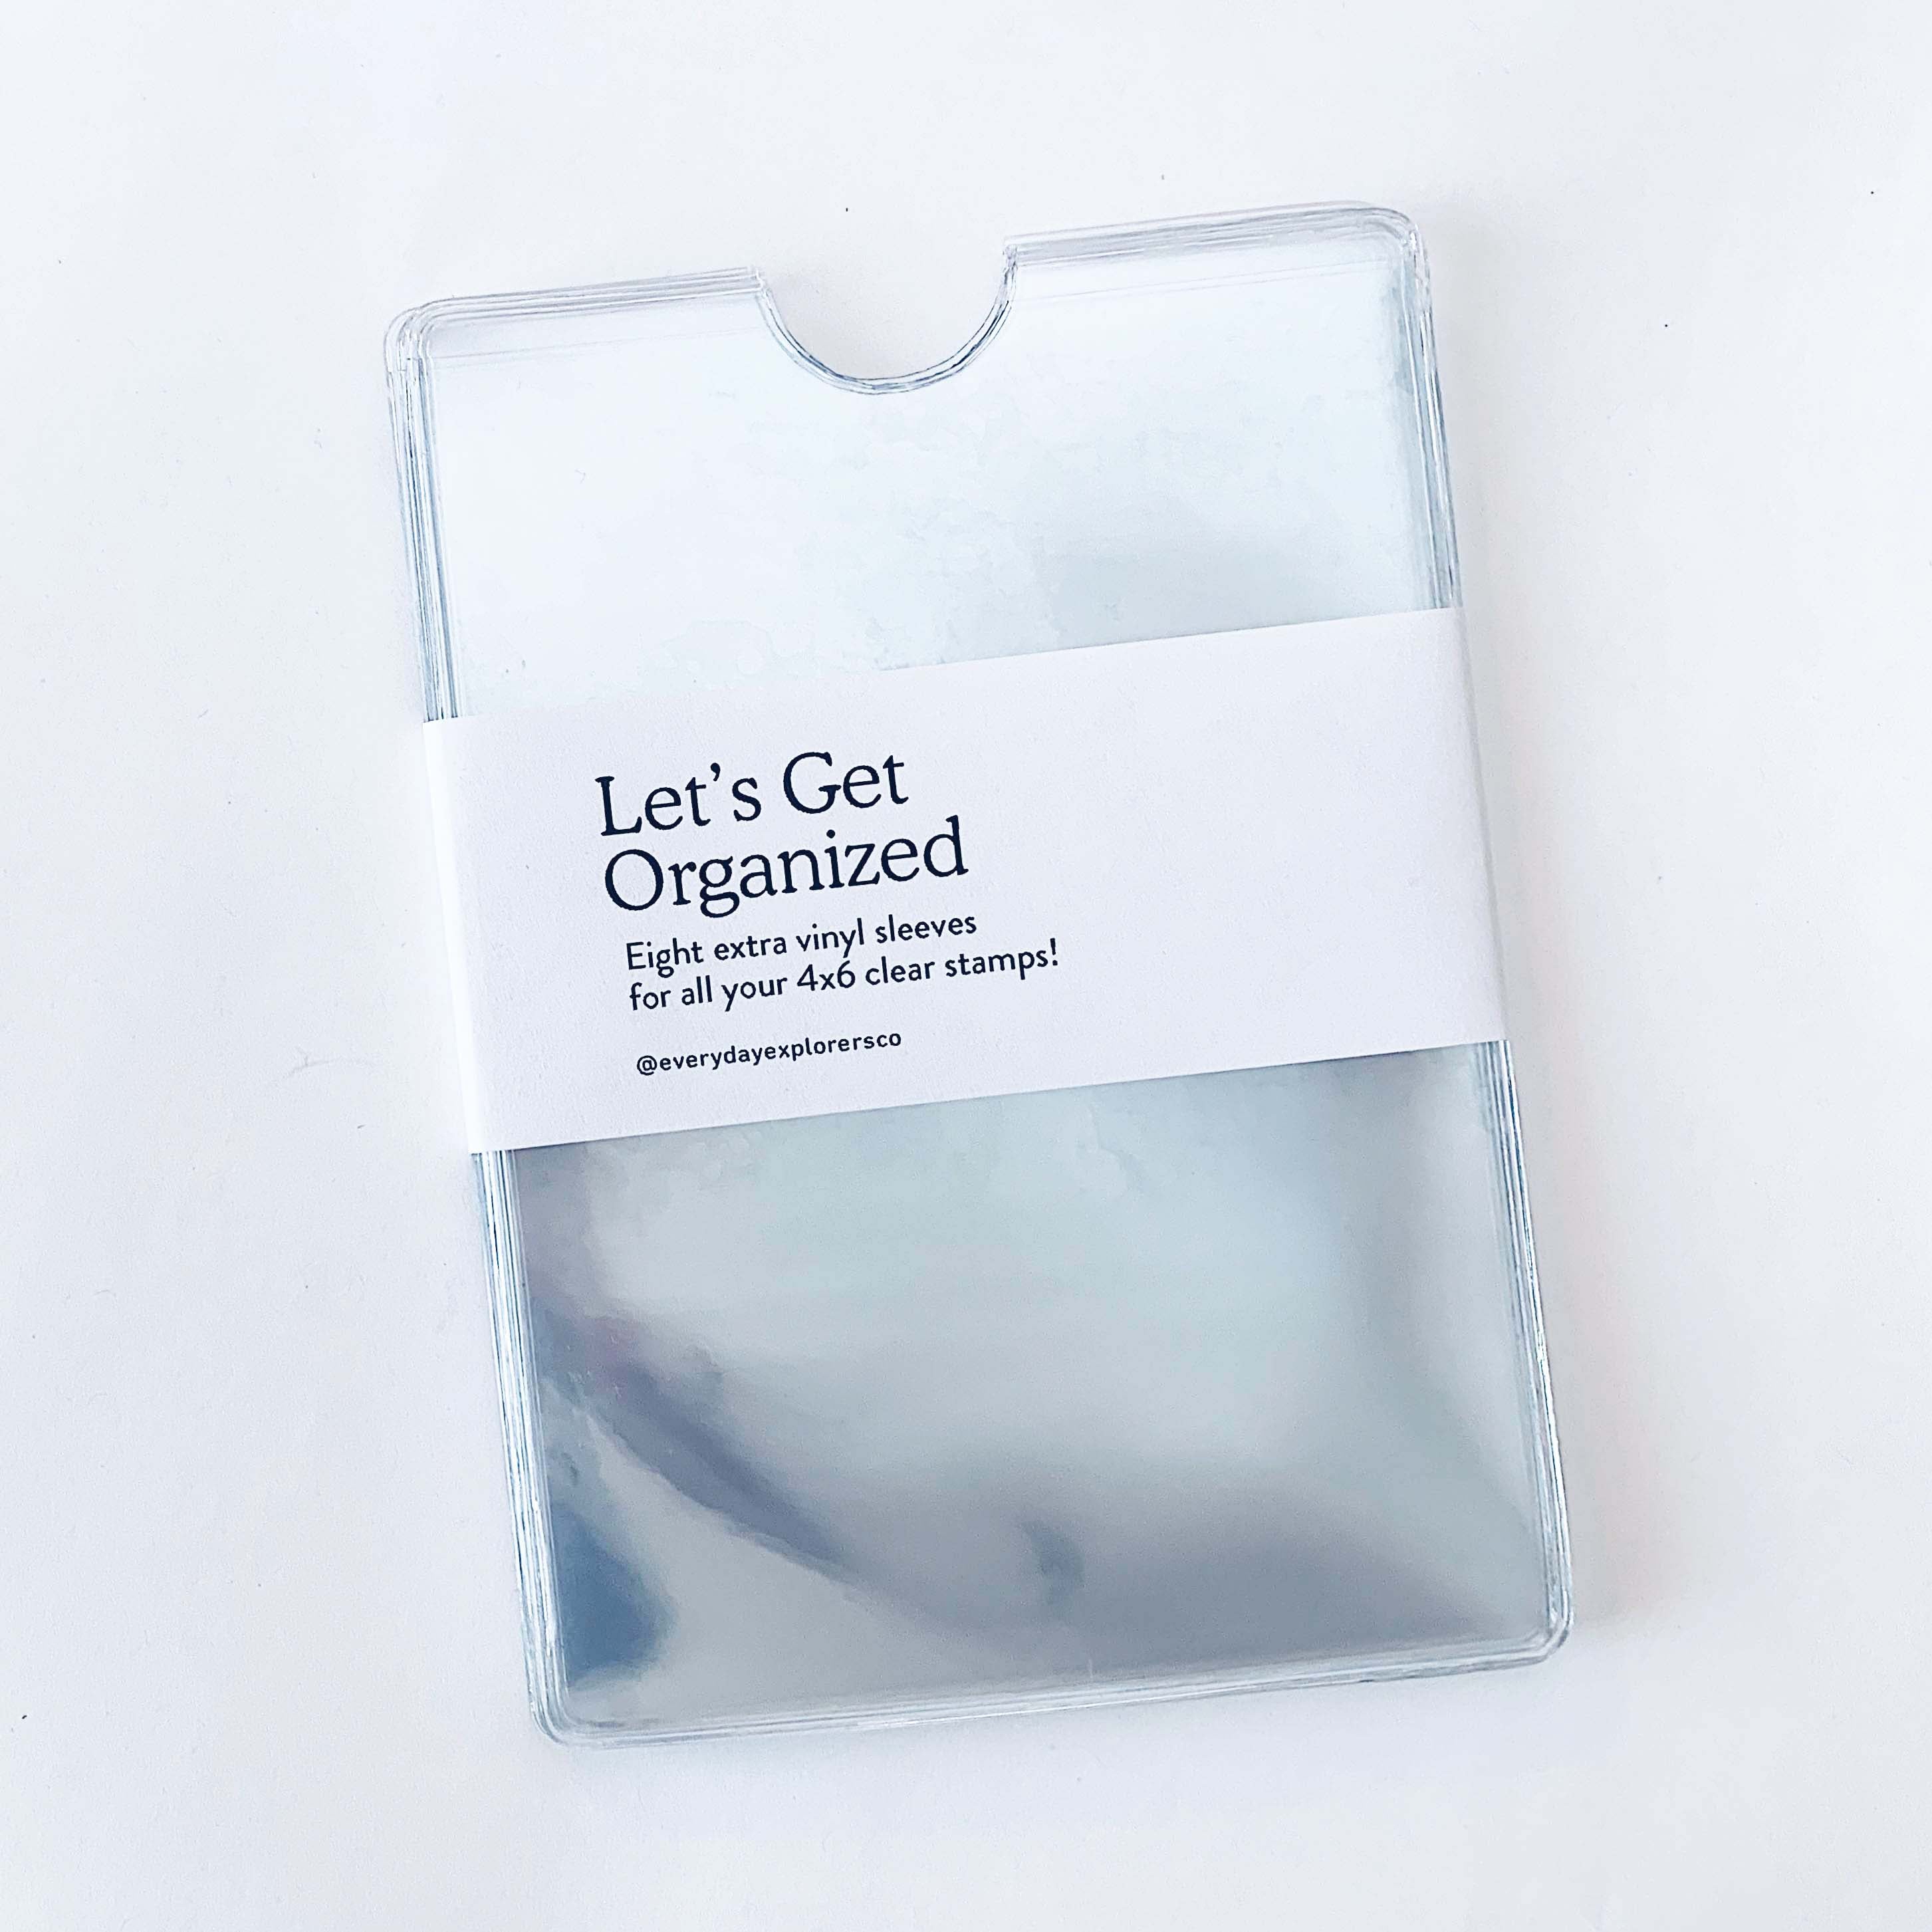 Let's Get Organized - Stamp Sleeves (Set of 8) – Everyday Explorers Co.